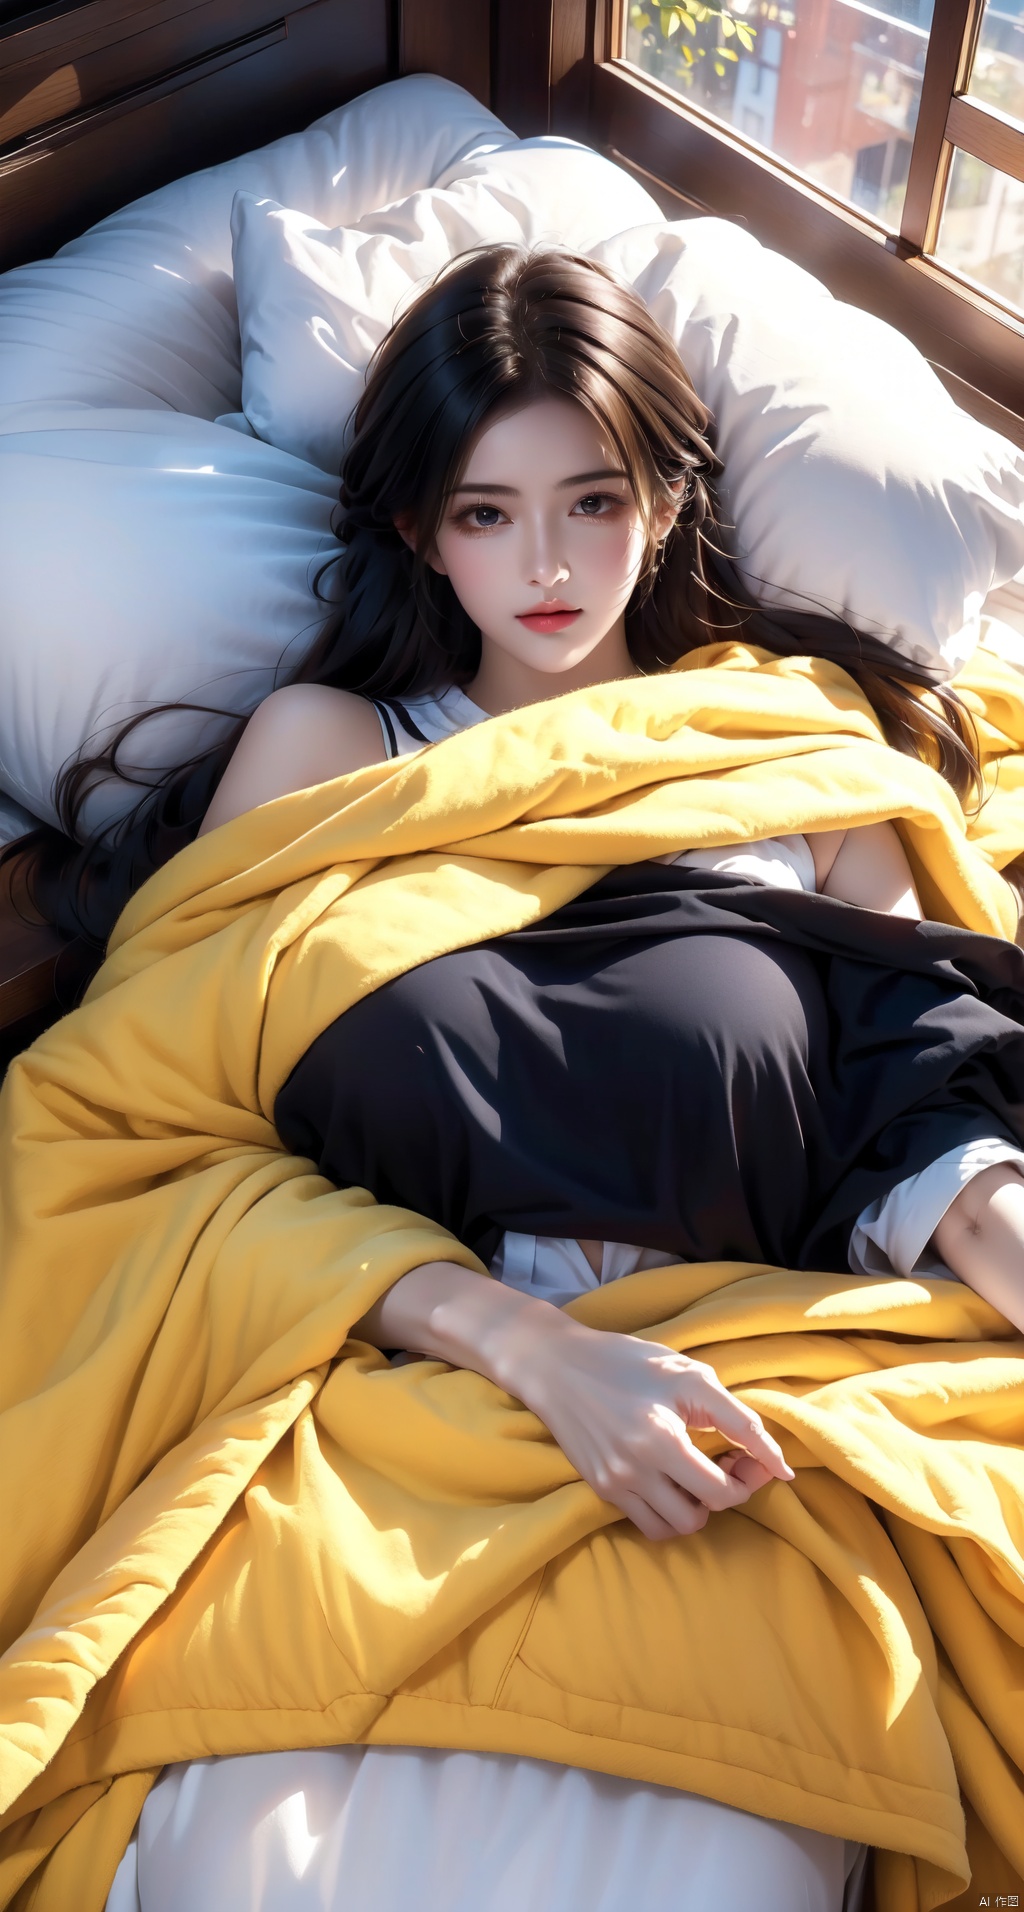 1girl, laying on bed, wearing a blanket, yellow blanket, yellow furry blanket, yellow fluffy blanket, laying on bed, lower body covered by blanket, above view, looking at the view, background indoor bedroom, lora:more_details:0.5